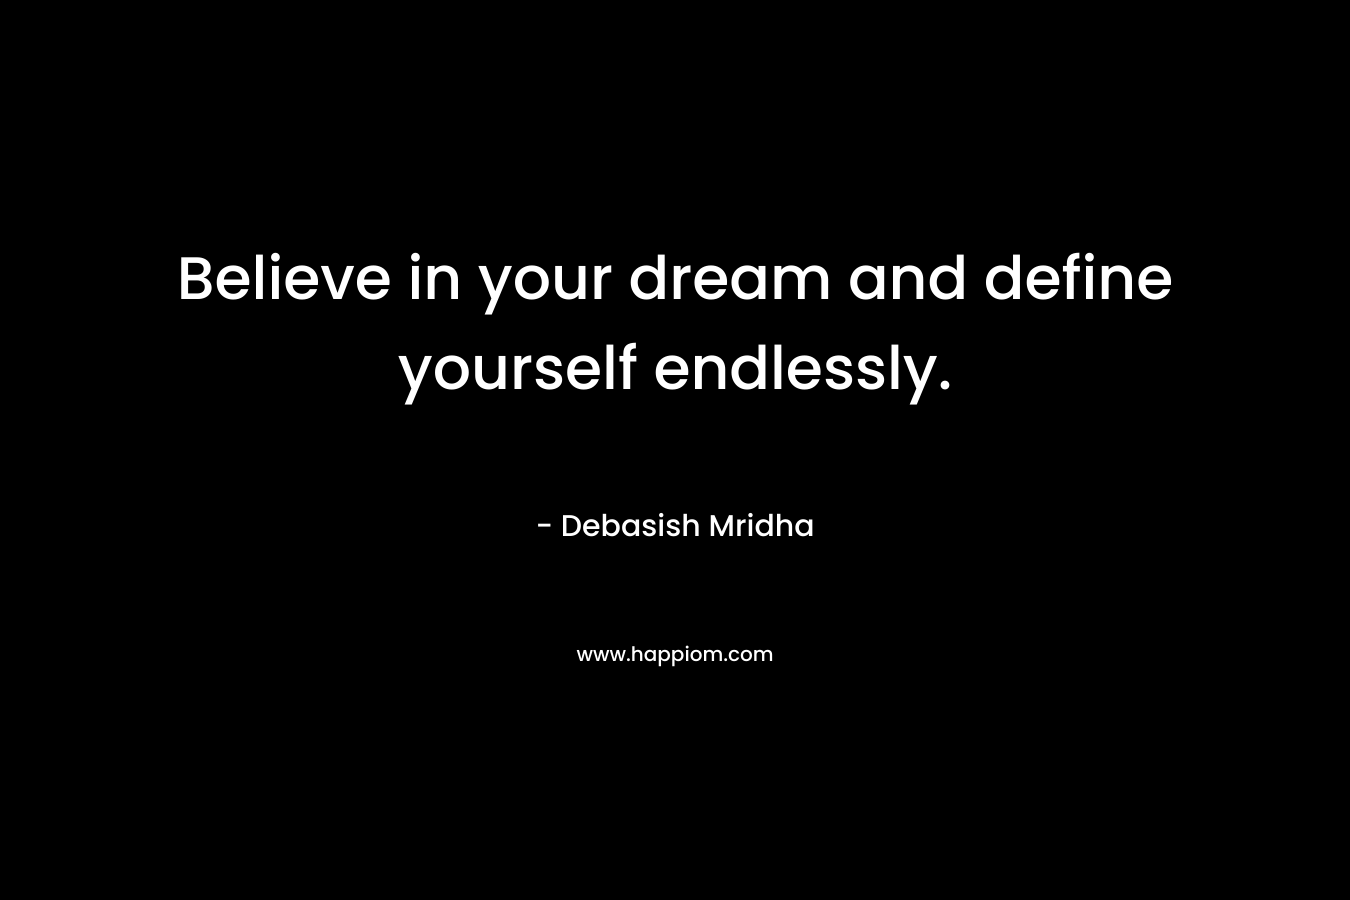 Believe in your dream and define yourself endlessly.